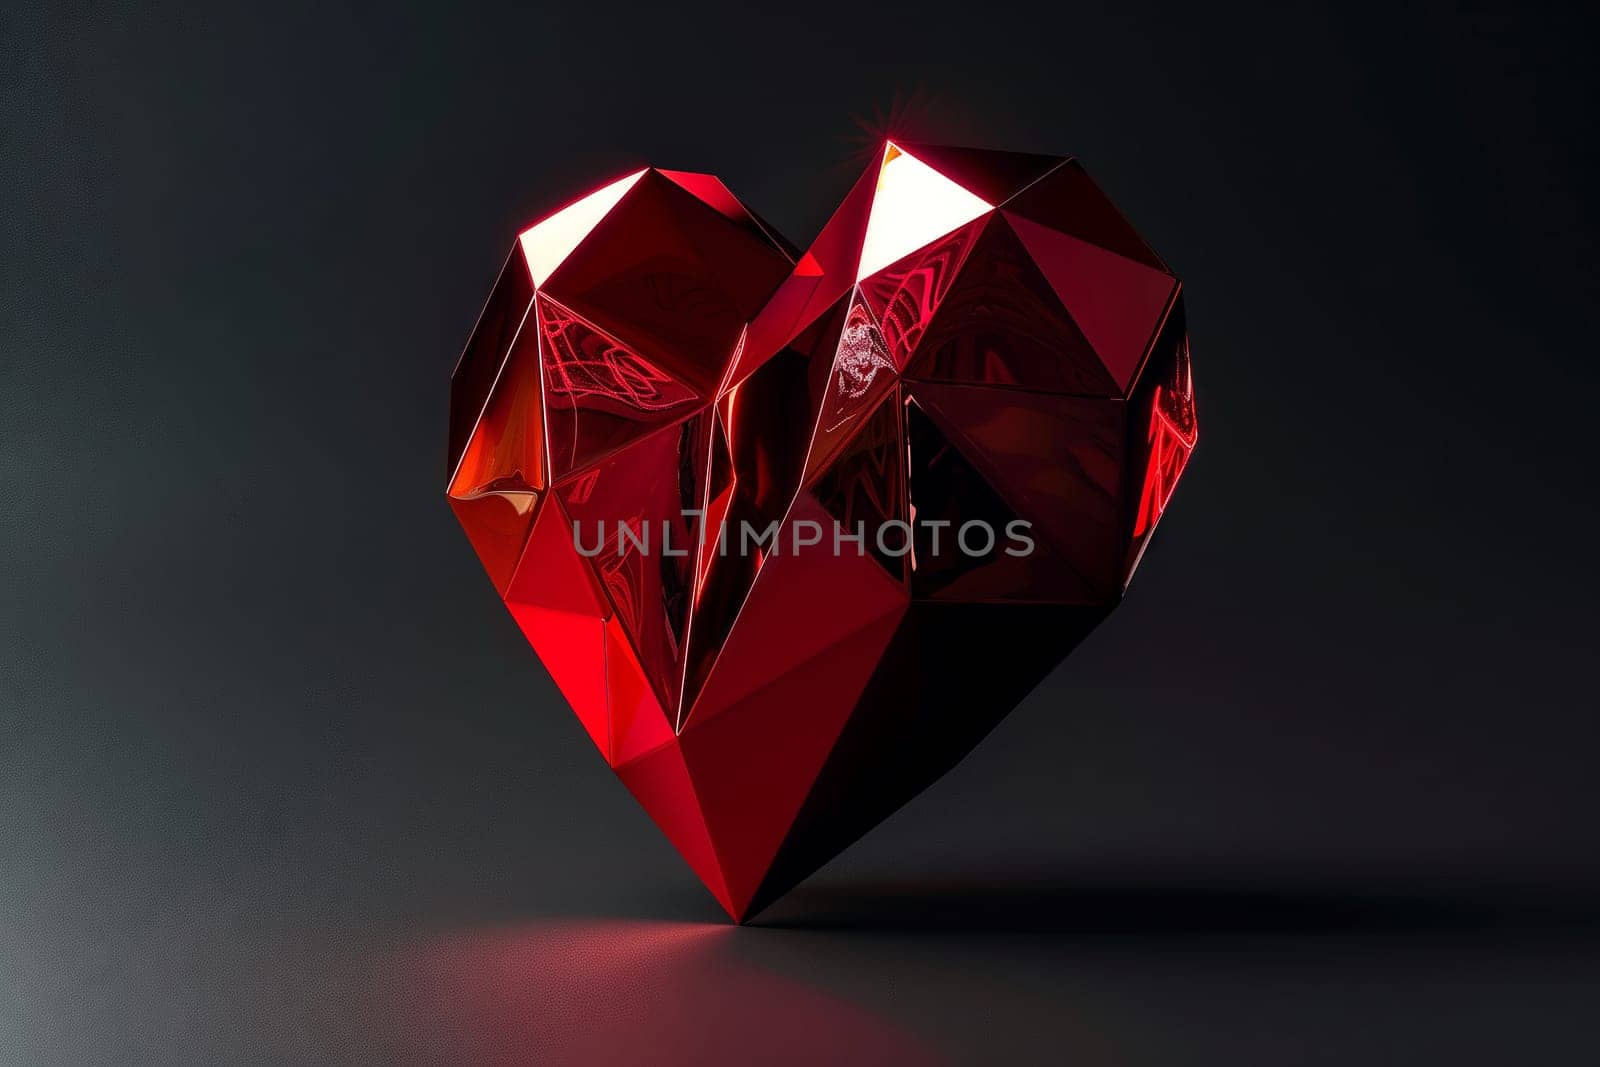 A red heartshaped diamond made of electric blue transparent material, displayed on a black background. The artistic craft combines symmetry and creativity, resembling origami art forms